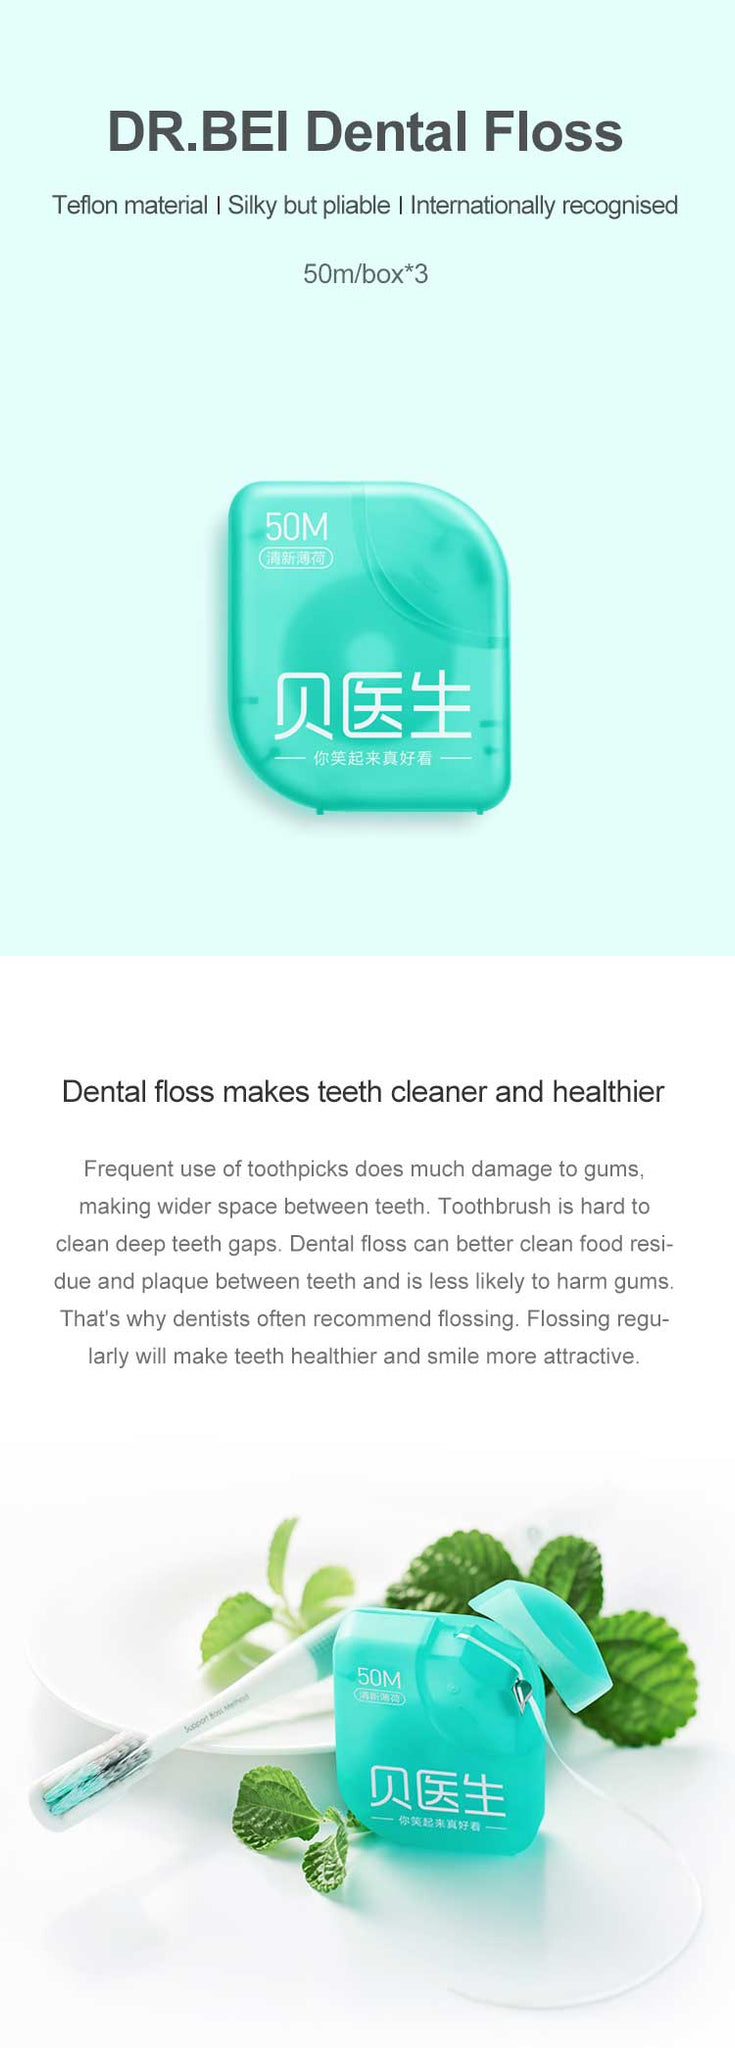 DR.BEI Dental Floss, 50m, 3 cases  Xiaomi Youpin DR.BEI Dental Floss Portable Teeth Clean Flosser Toothpicks Dental Oral Care Teeth Hygiene Soft Flosser 50M /Box Cleaning Tools